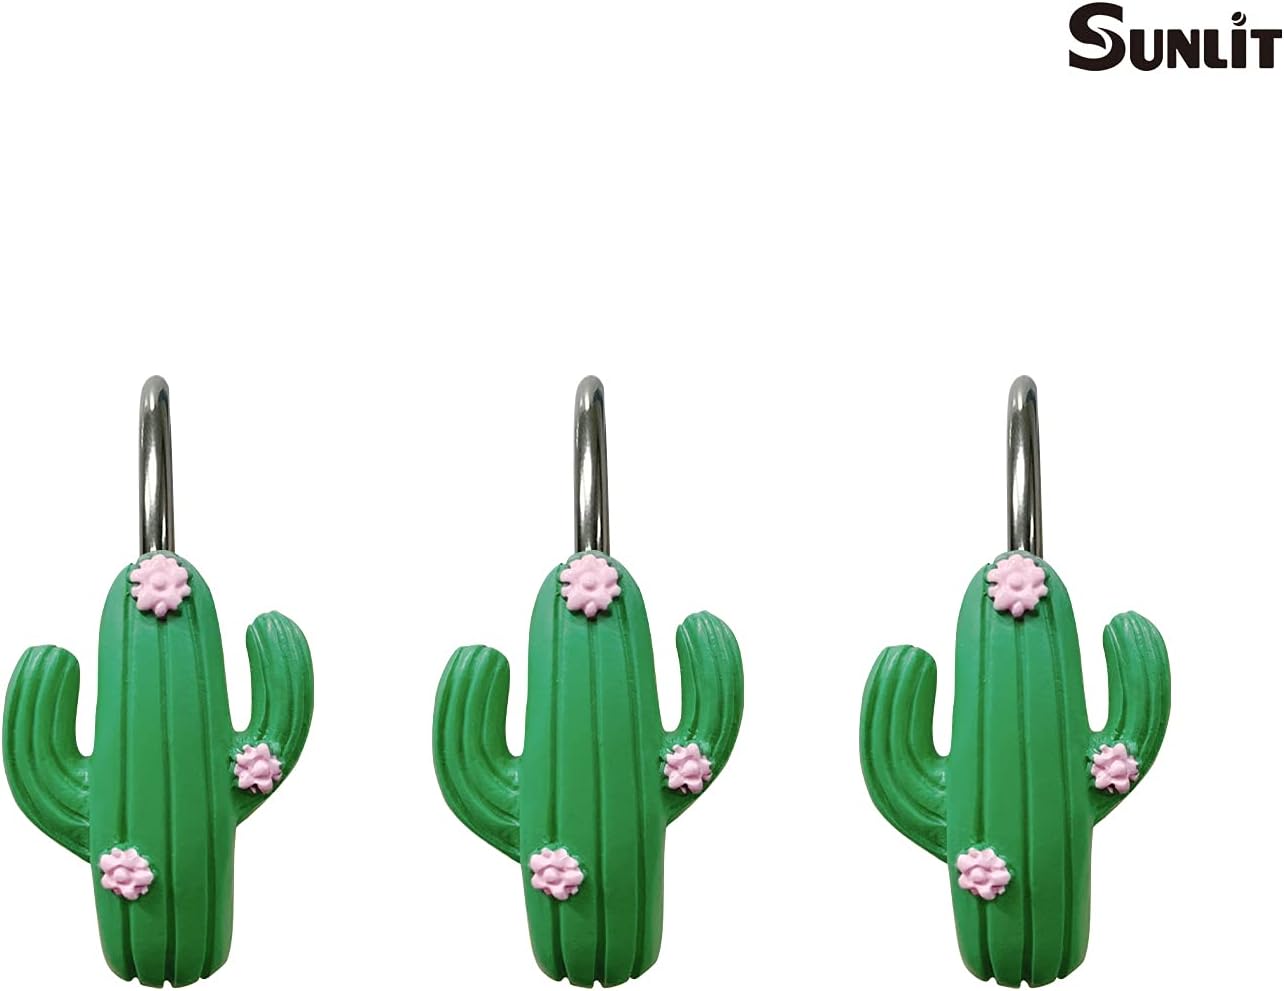 Sunlit Tropical Cactus Decorative Shower Curtain Hooks, Green Cactus Flowers Blossom Shower Curtain Rings, Resin, Summer Bathroom Decoration - 12 Pack